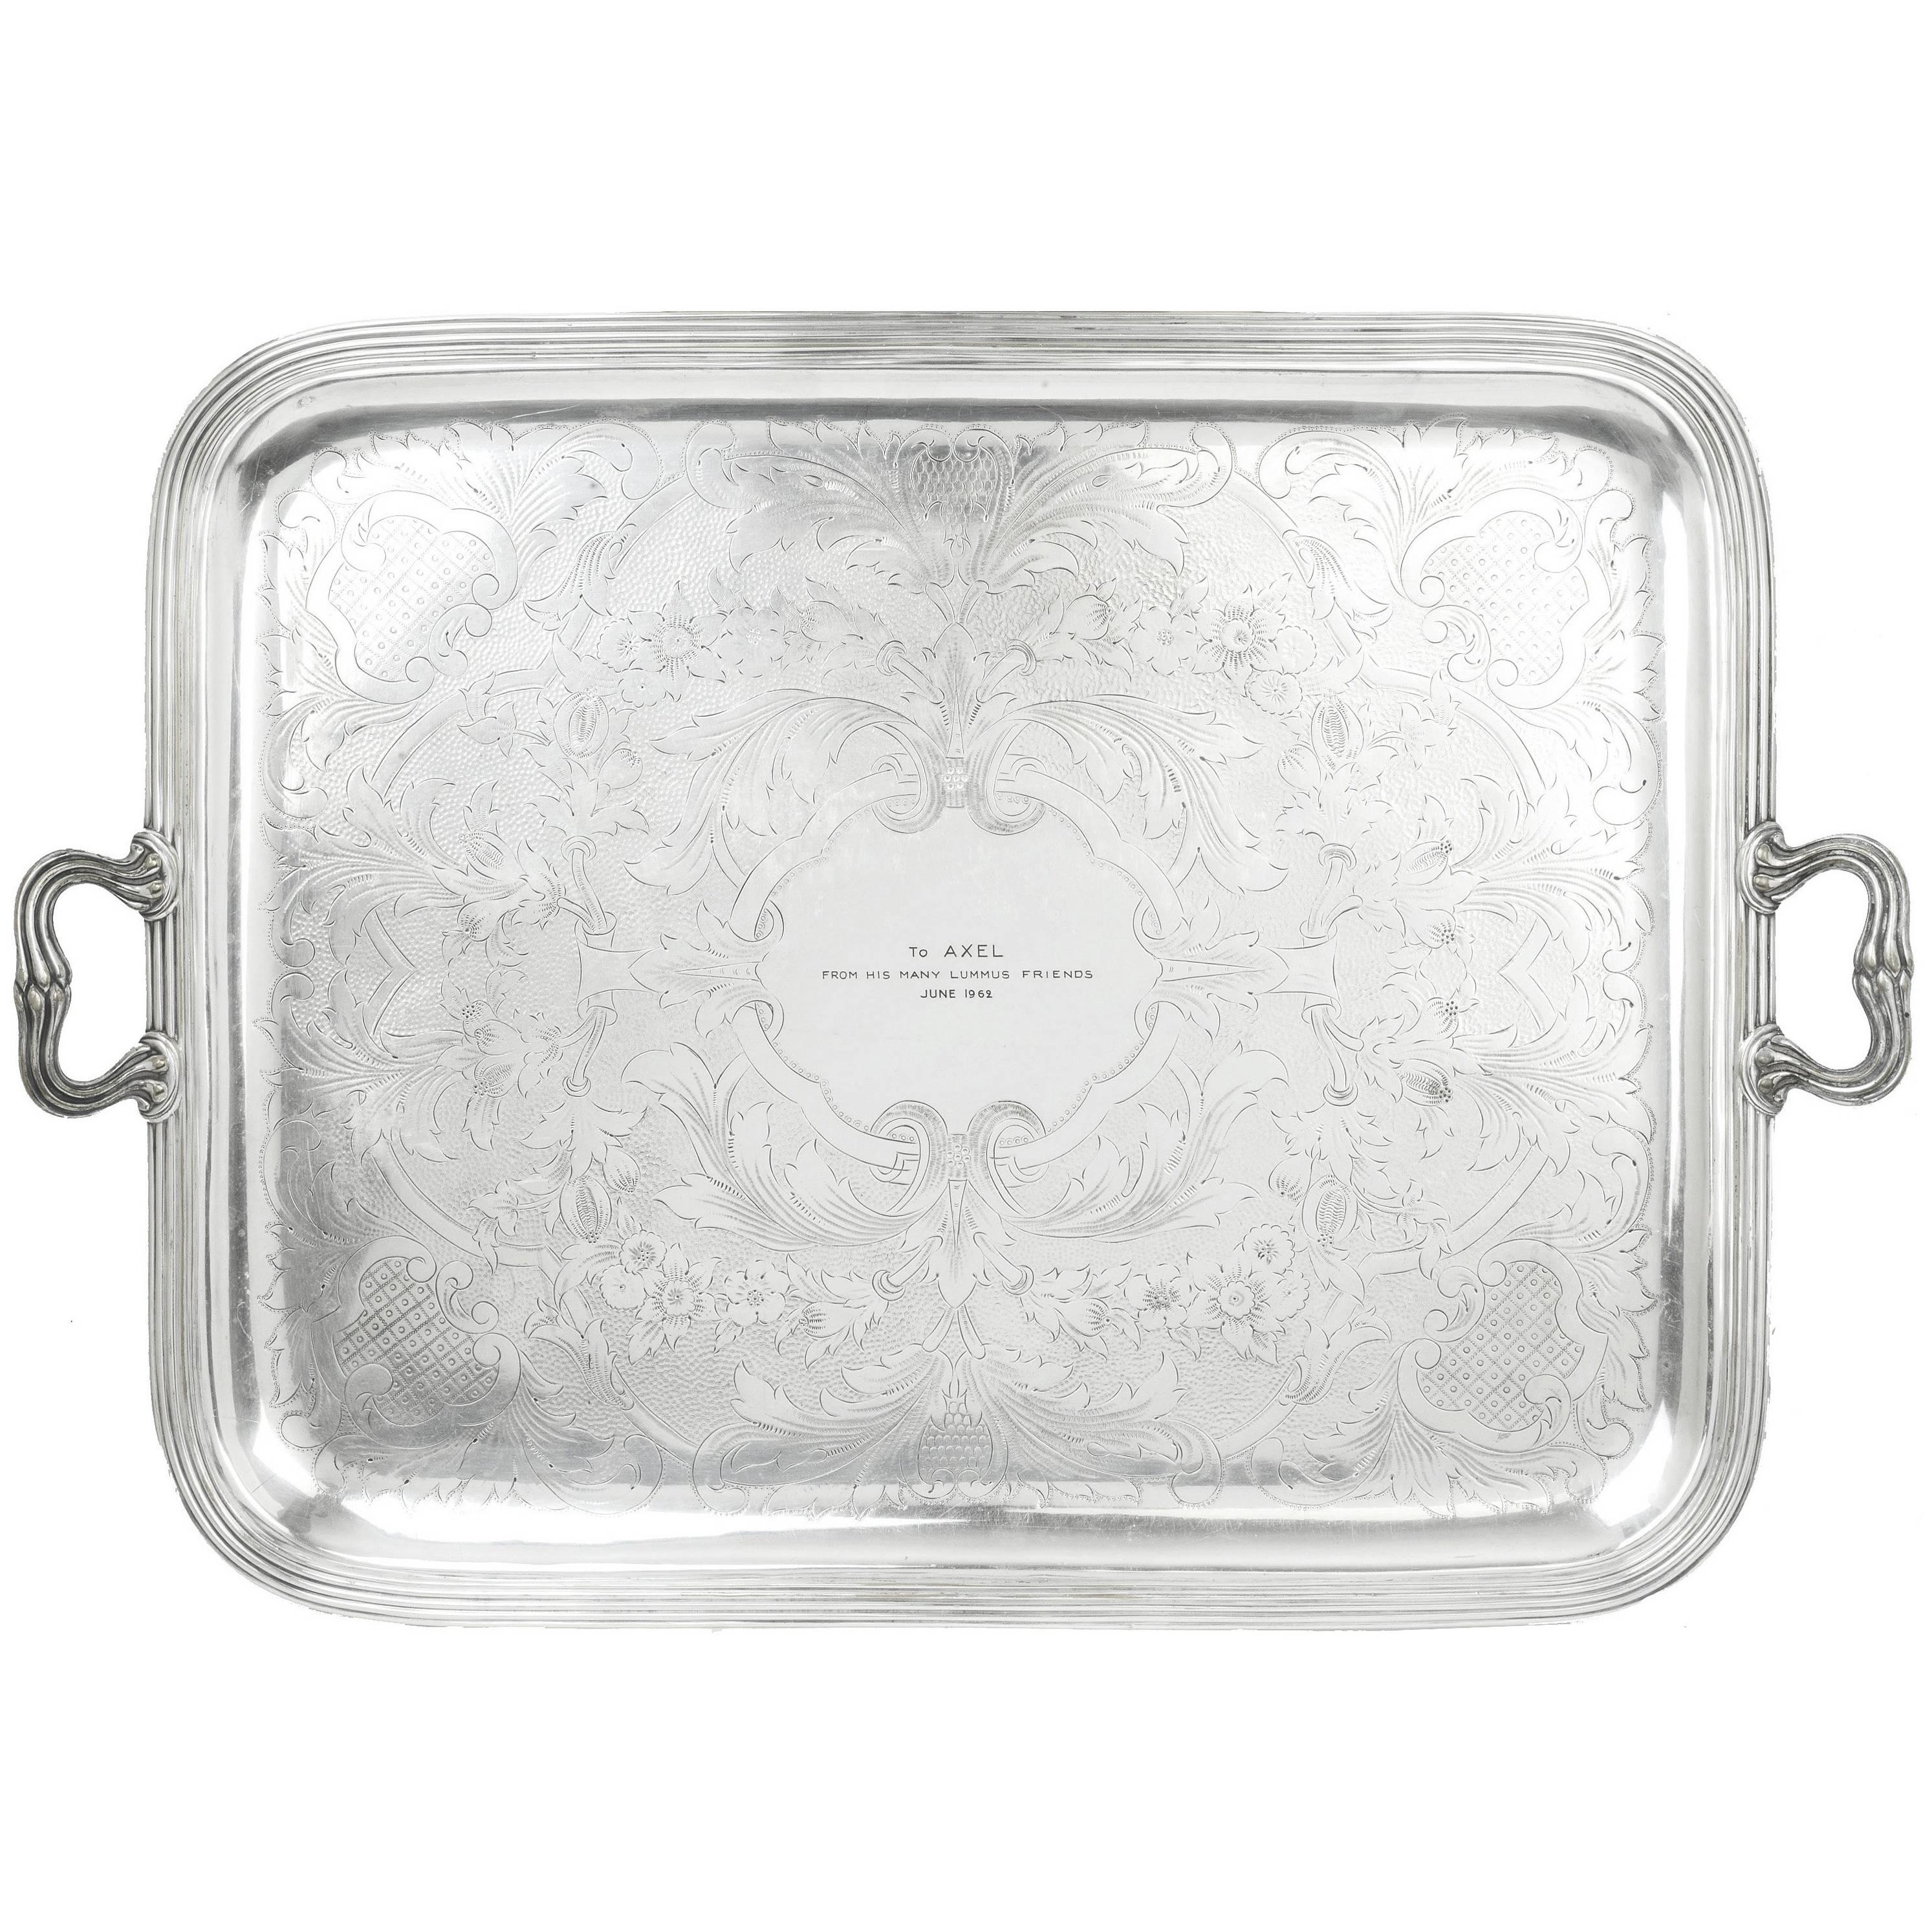 Large Christofle Reeded Edge Silver Plated Tray, c1850